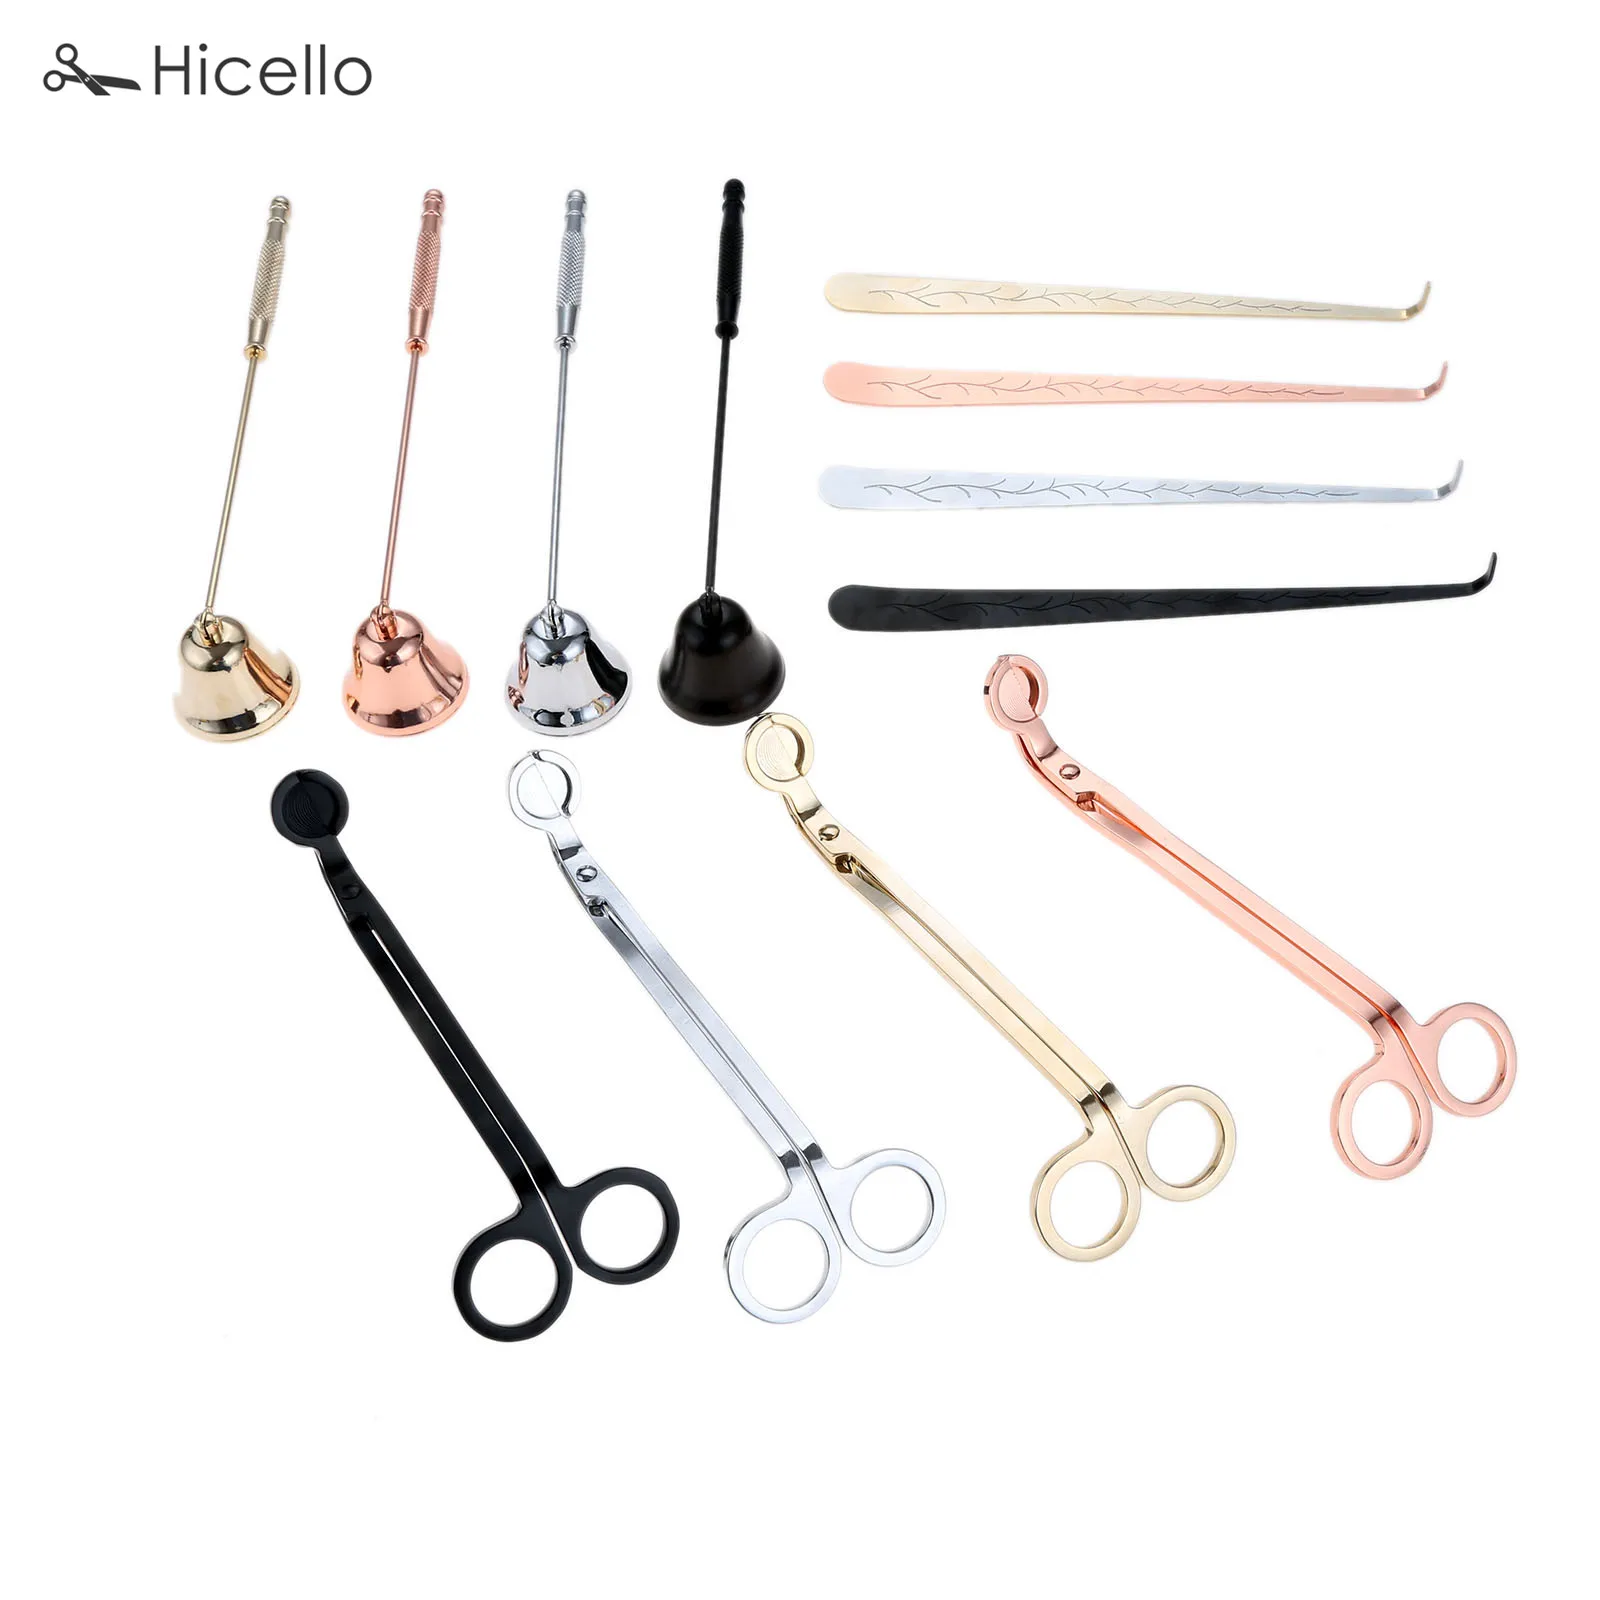 3pcs/set Candle Snuffer Trimmer Hook Dipper Candle Accessory Stainless Steel Extinguisher Flame Home Deco Rose Gold scissors